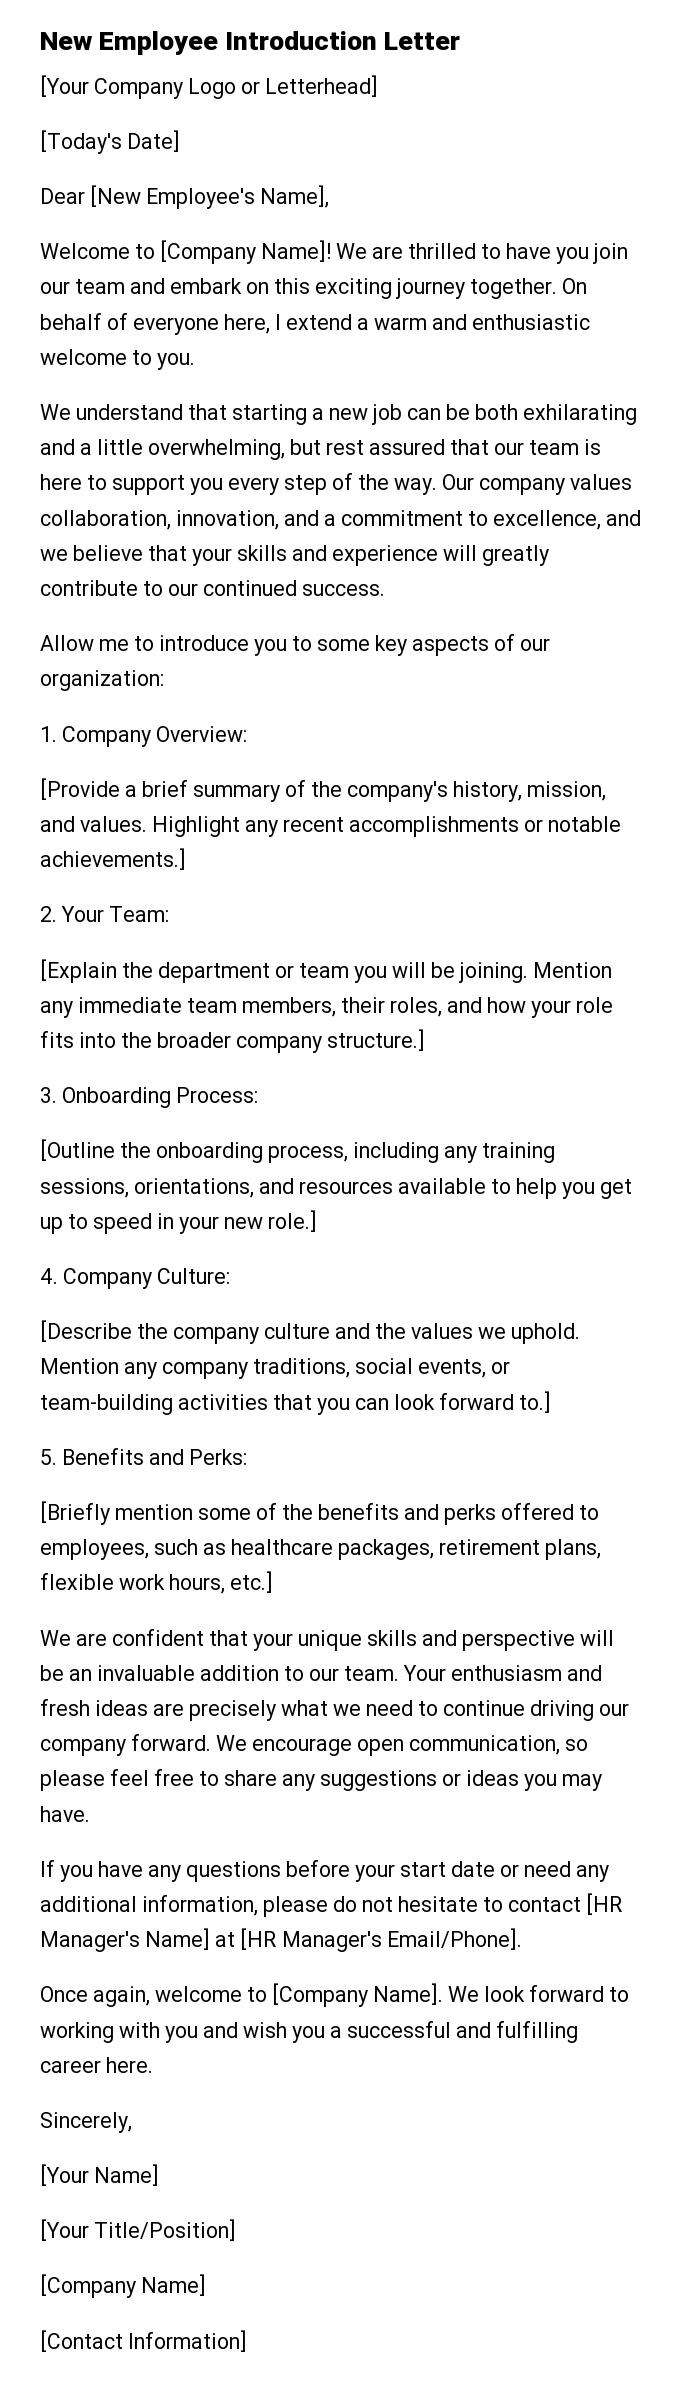 New Employee Introduction Letter